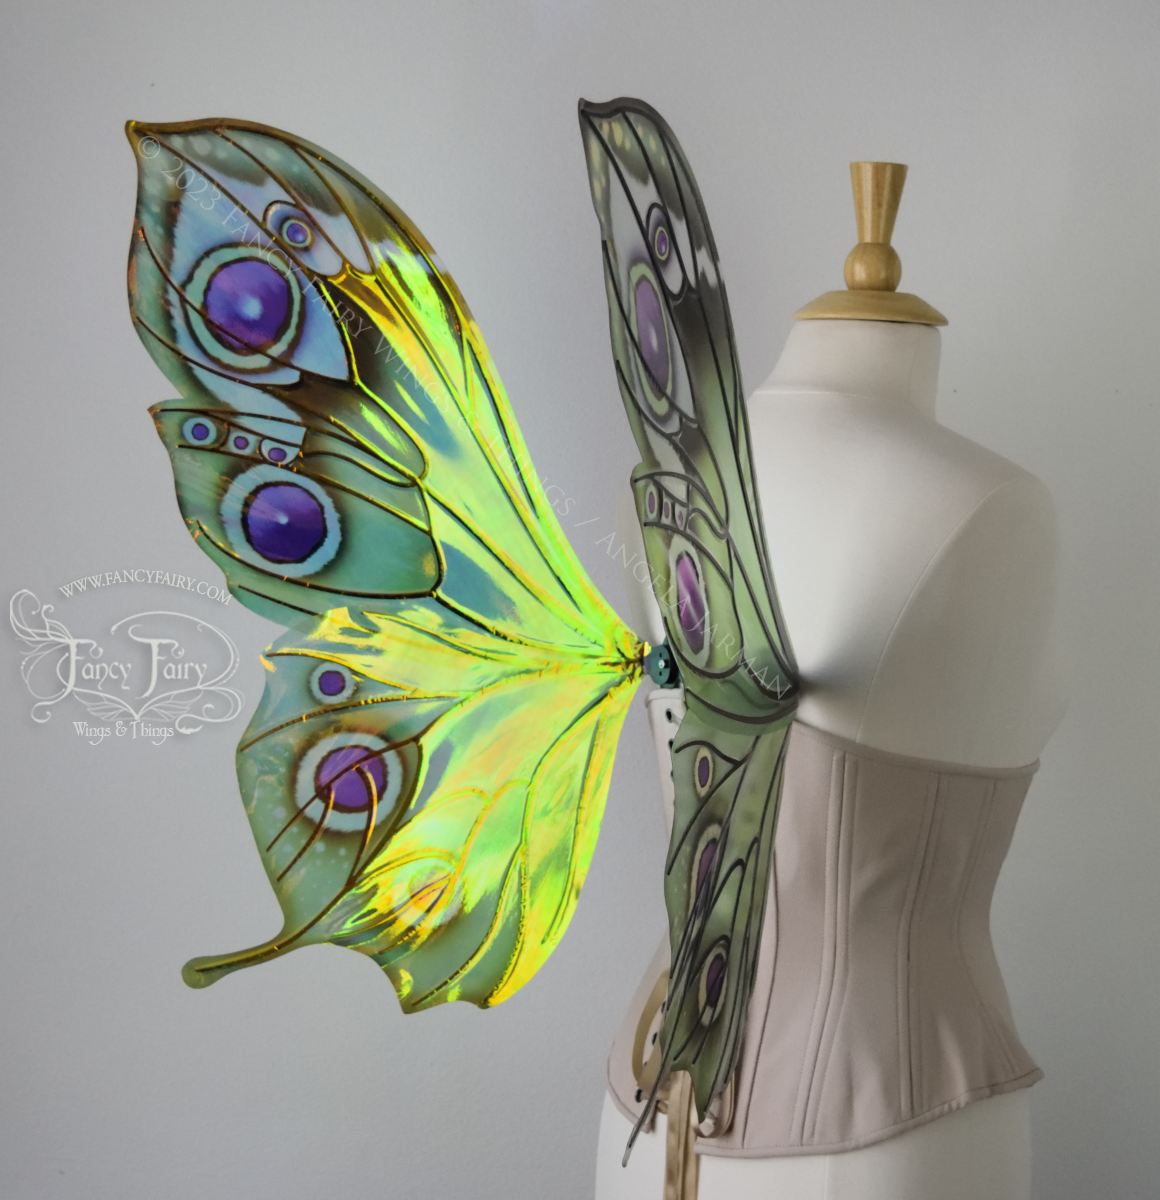 Back left 3/4 view of iridescent green, black and fuchsia costume fairy wings, worn on a dressform